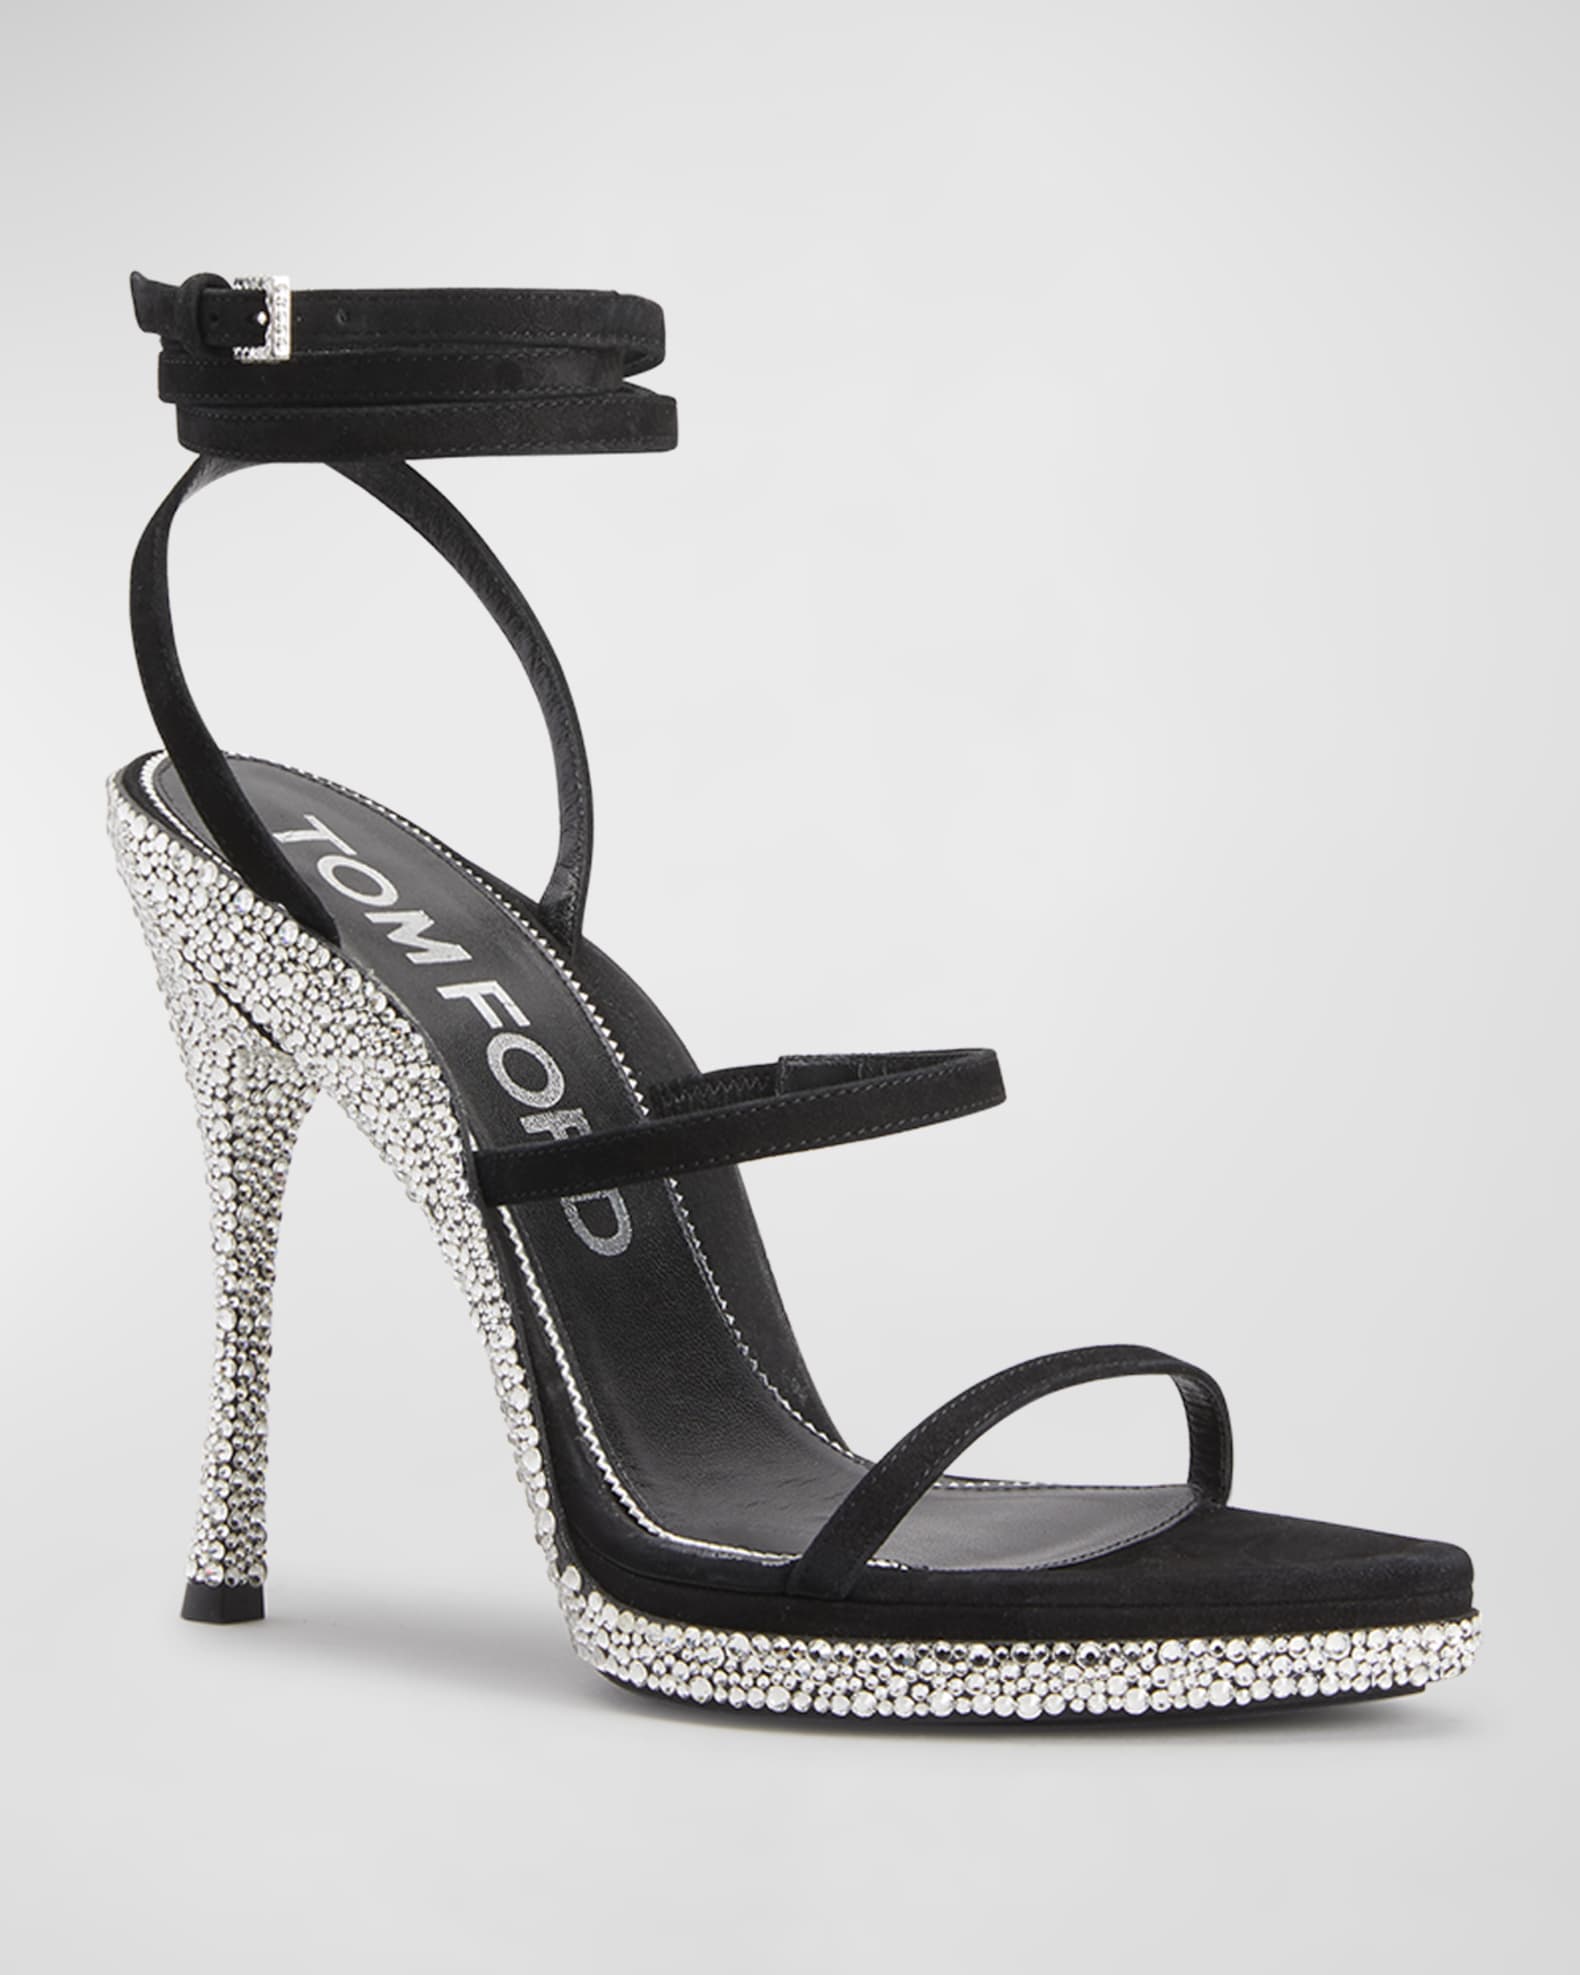 TOM FORD Crystal-Embellished Suede Stiletto Sandals | Neiman Marcus